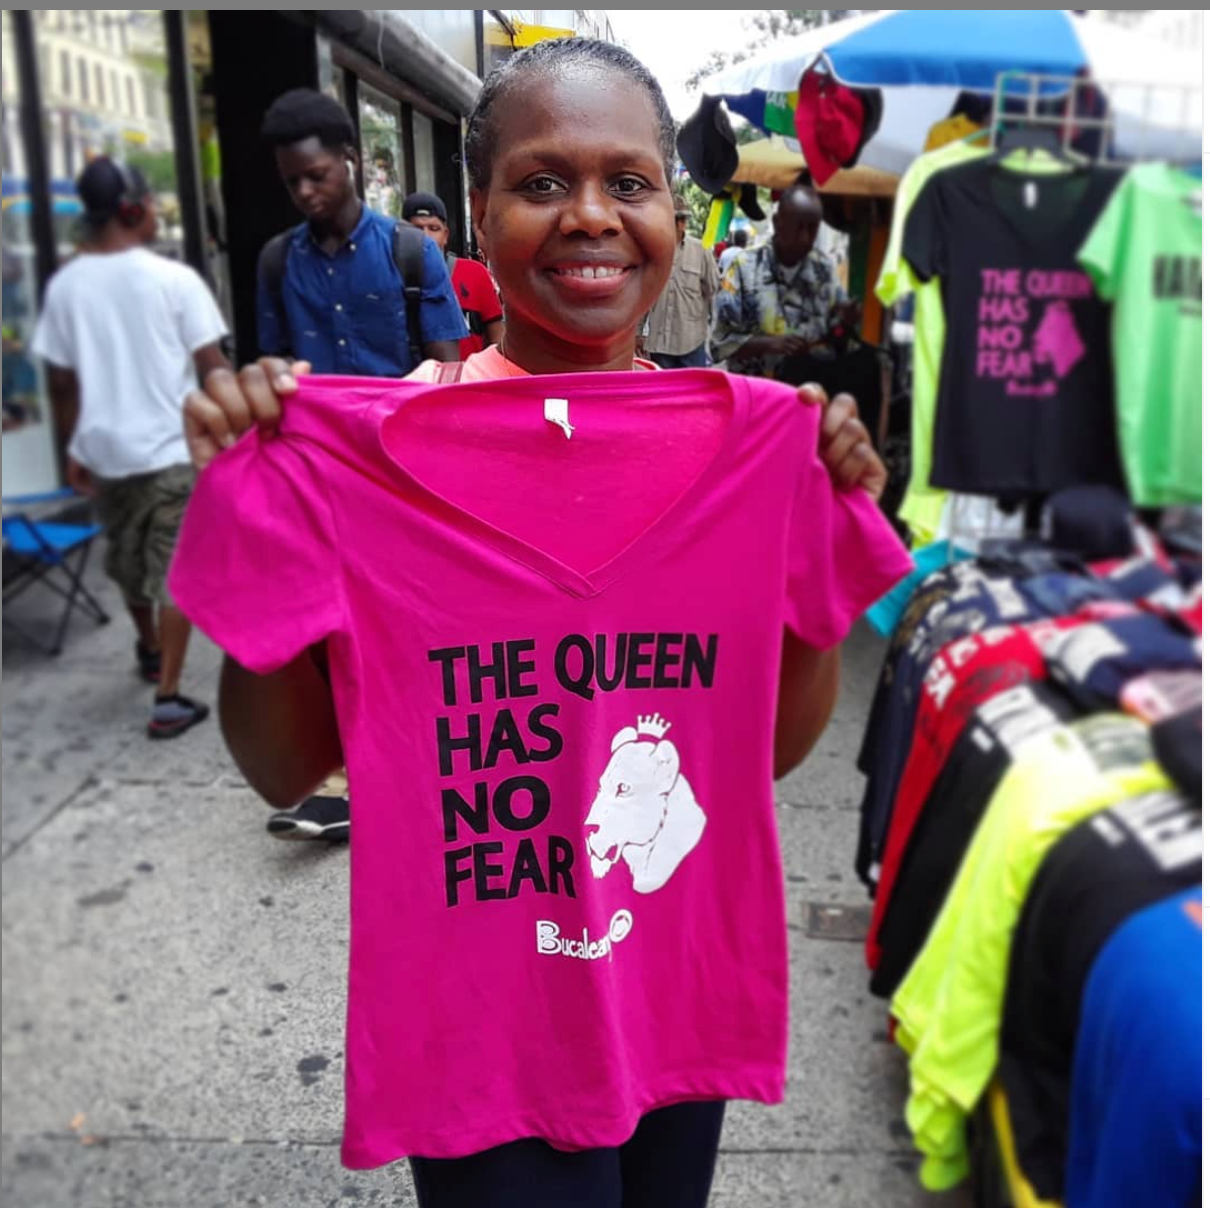 NATIONAL BREAST CANCER AWARENESS MONTH GET A FREE PINK "THE QUEEN HAS NO FEAR T"